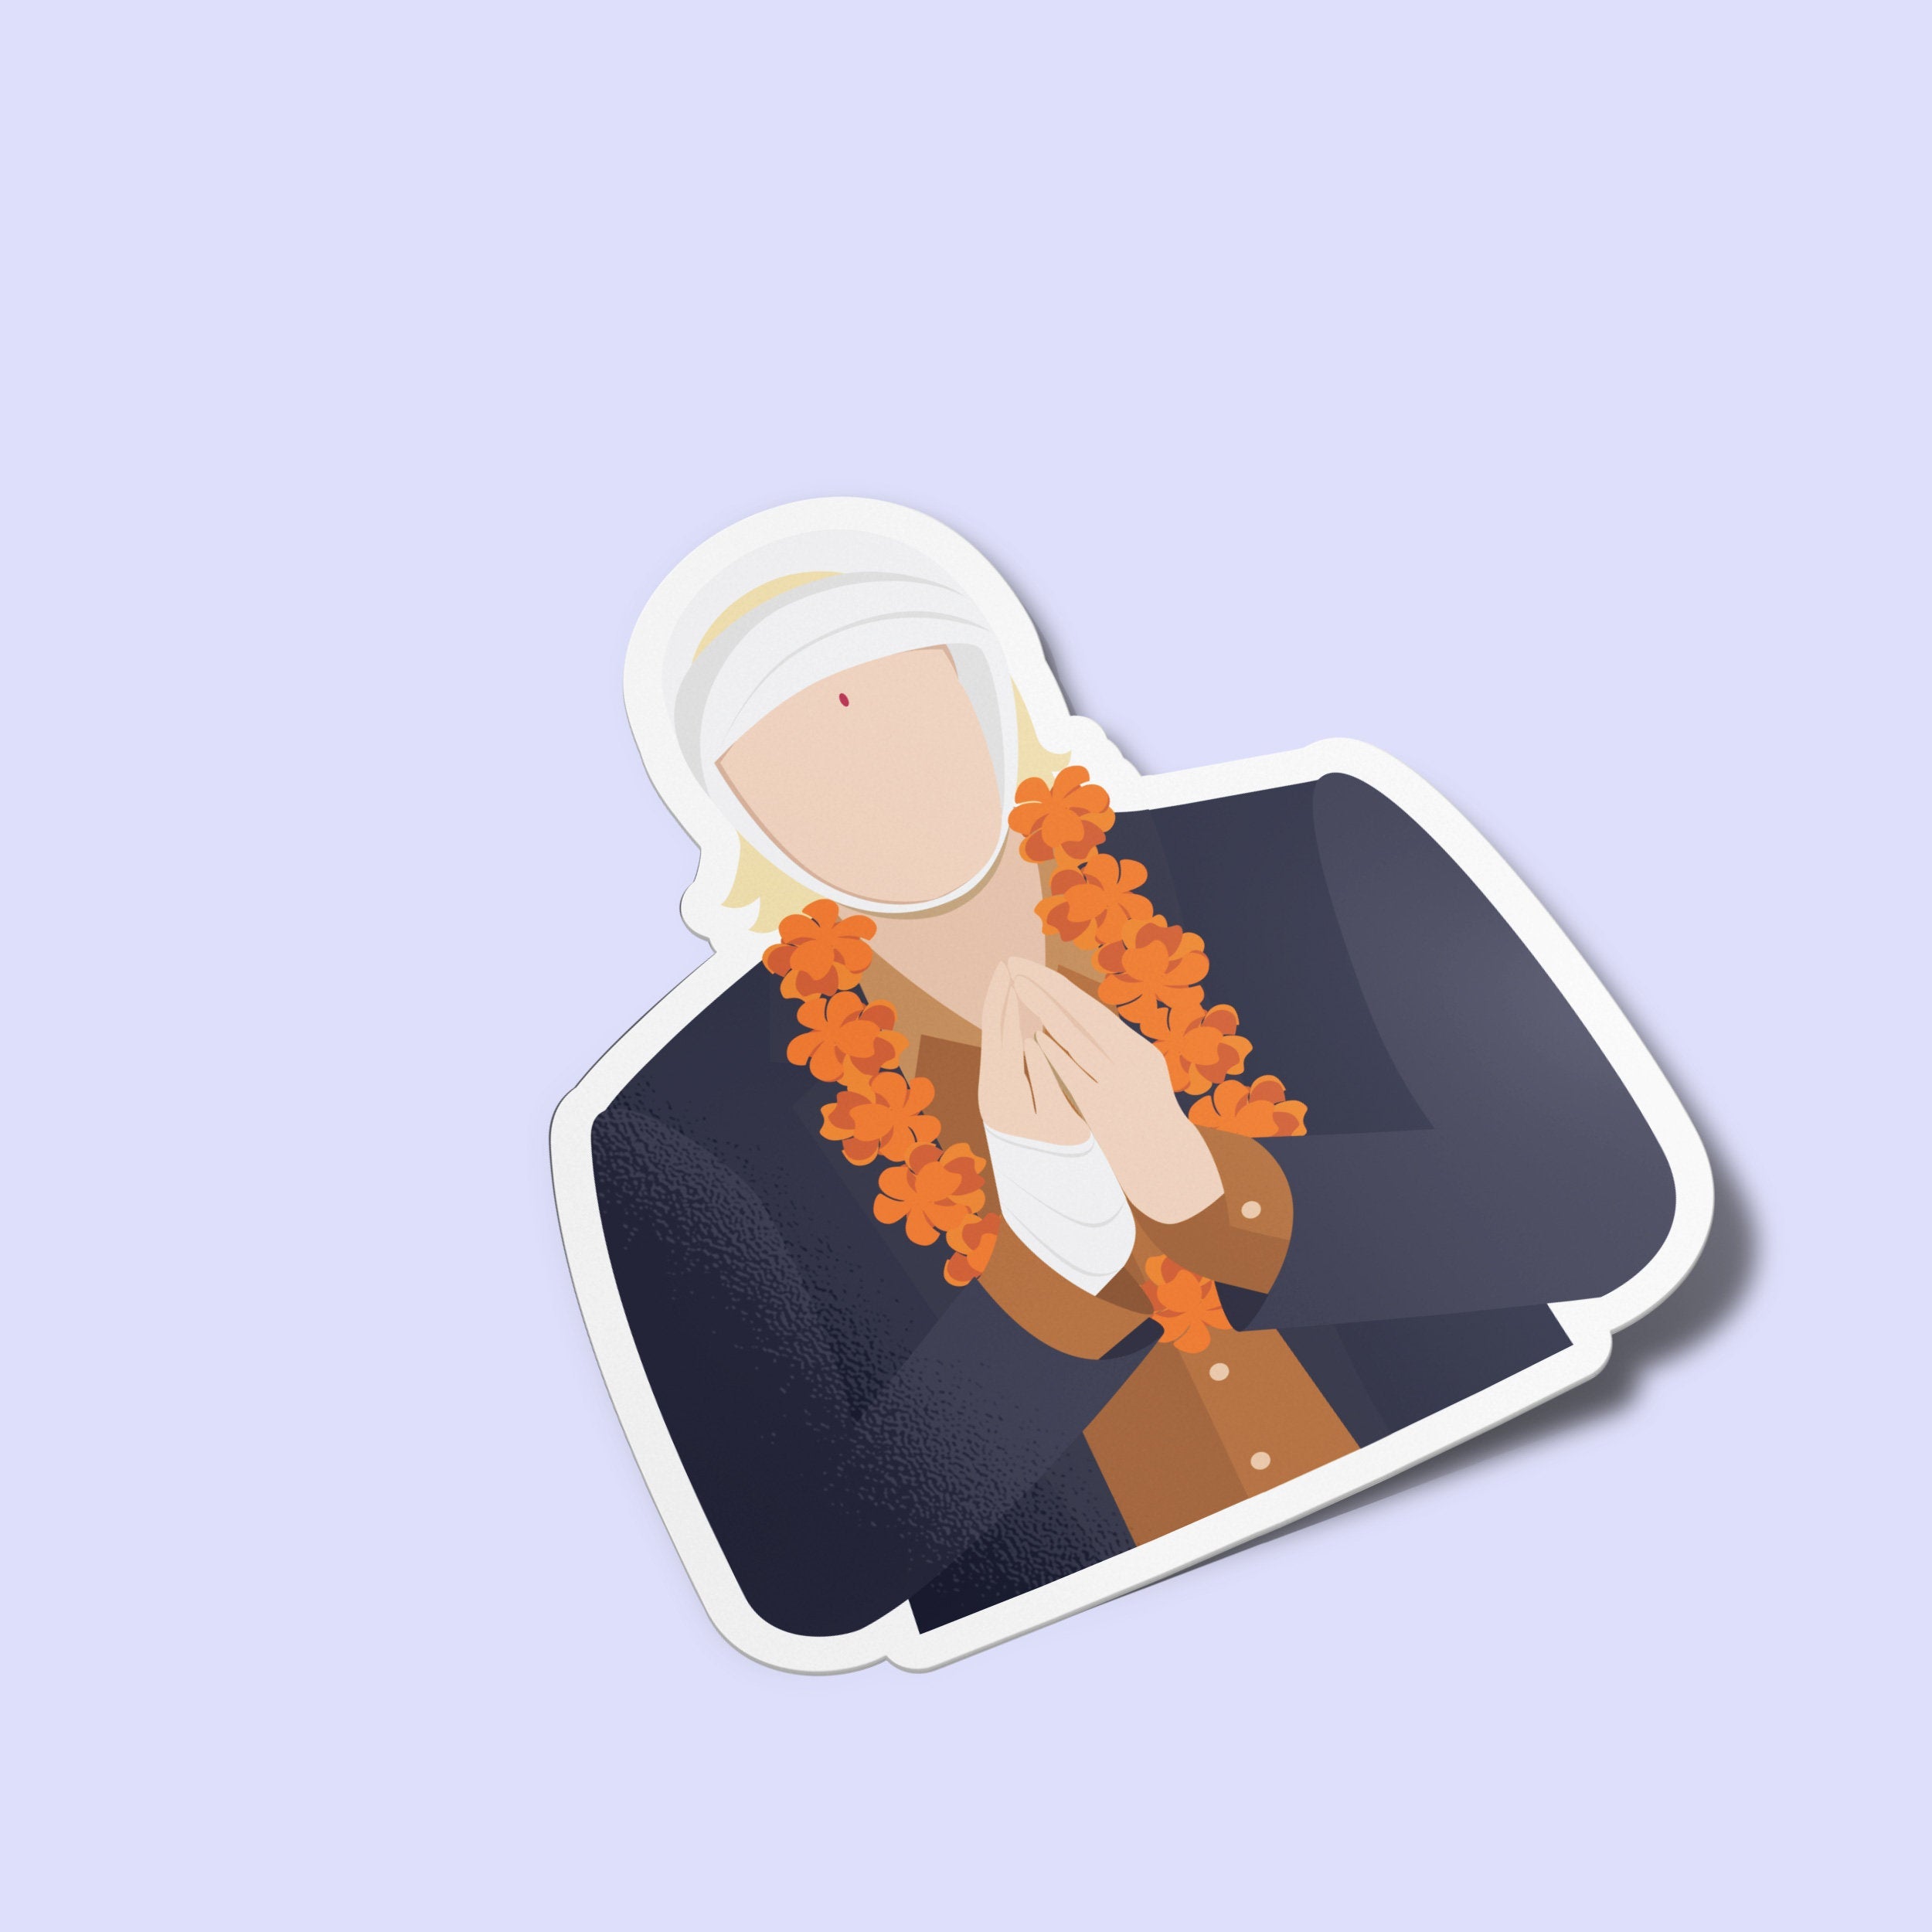 Francis Premium Vinyl Sticker, The Darjeeling Limited Wes Anderson-Inspired Laptop Decal